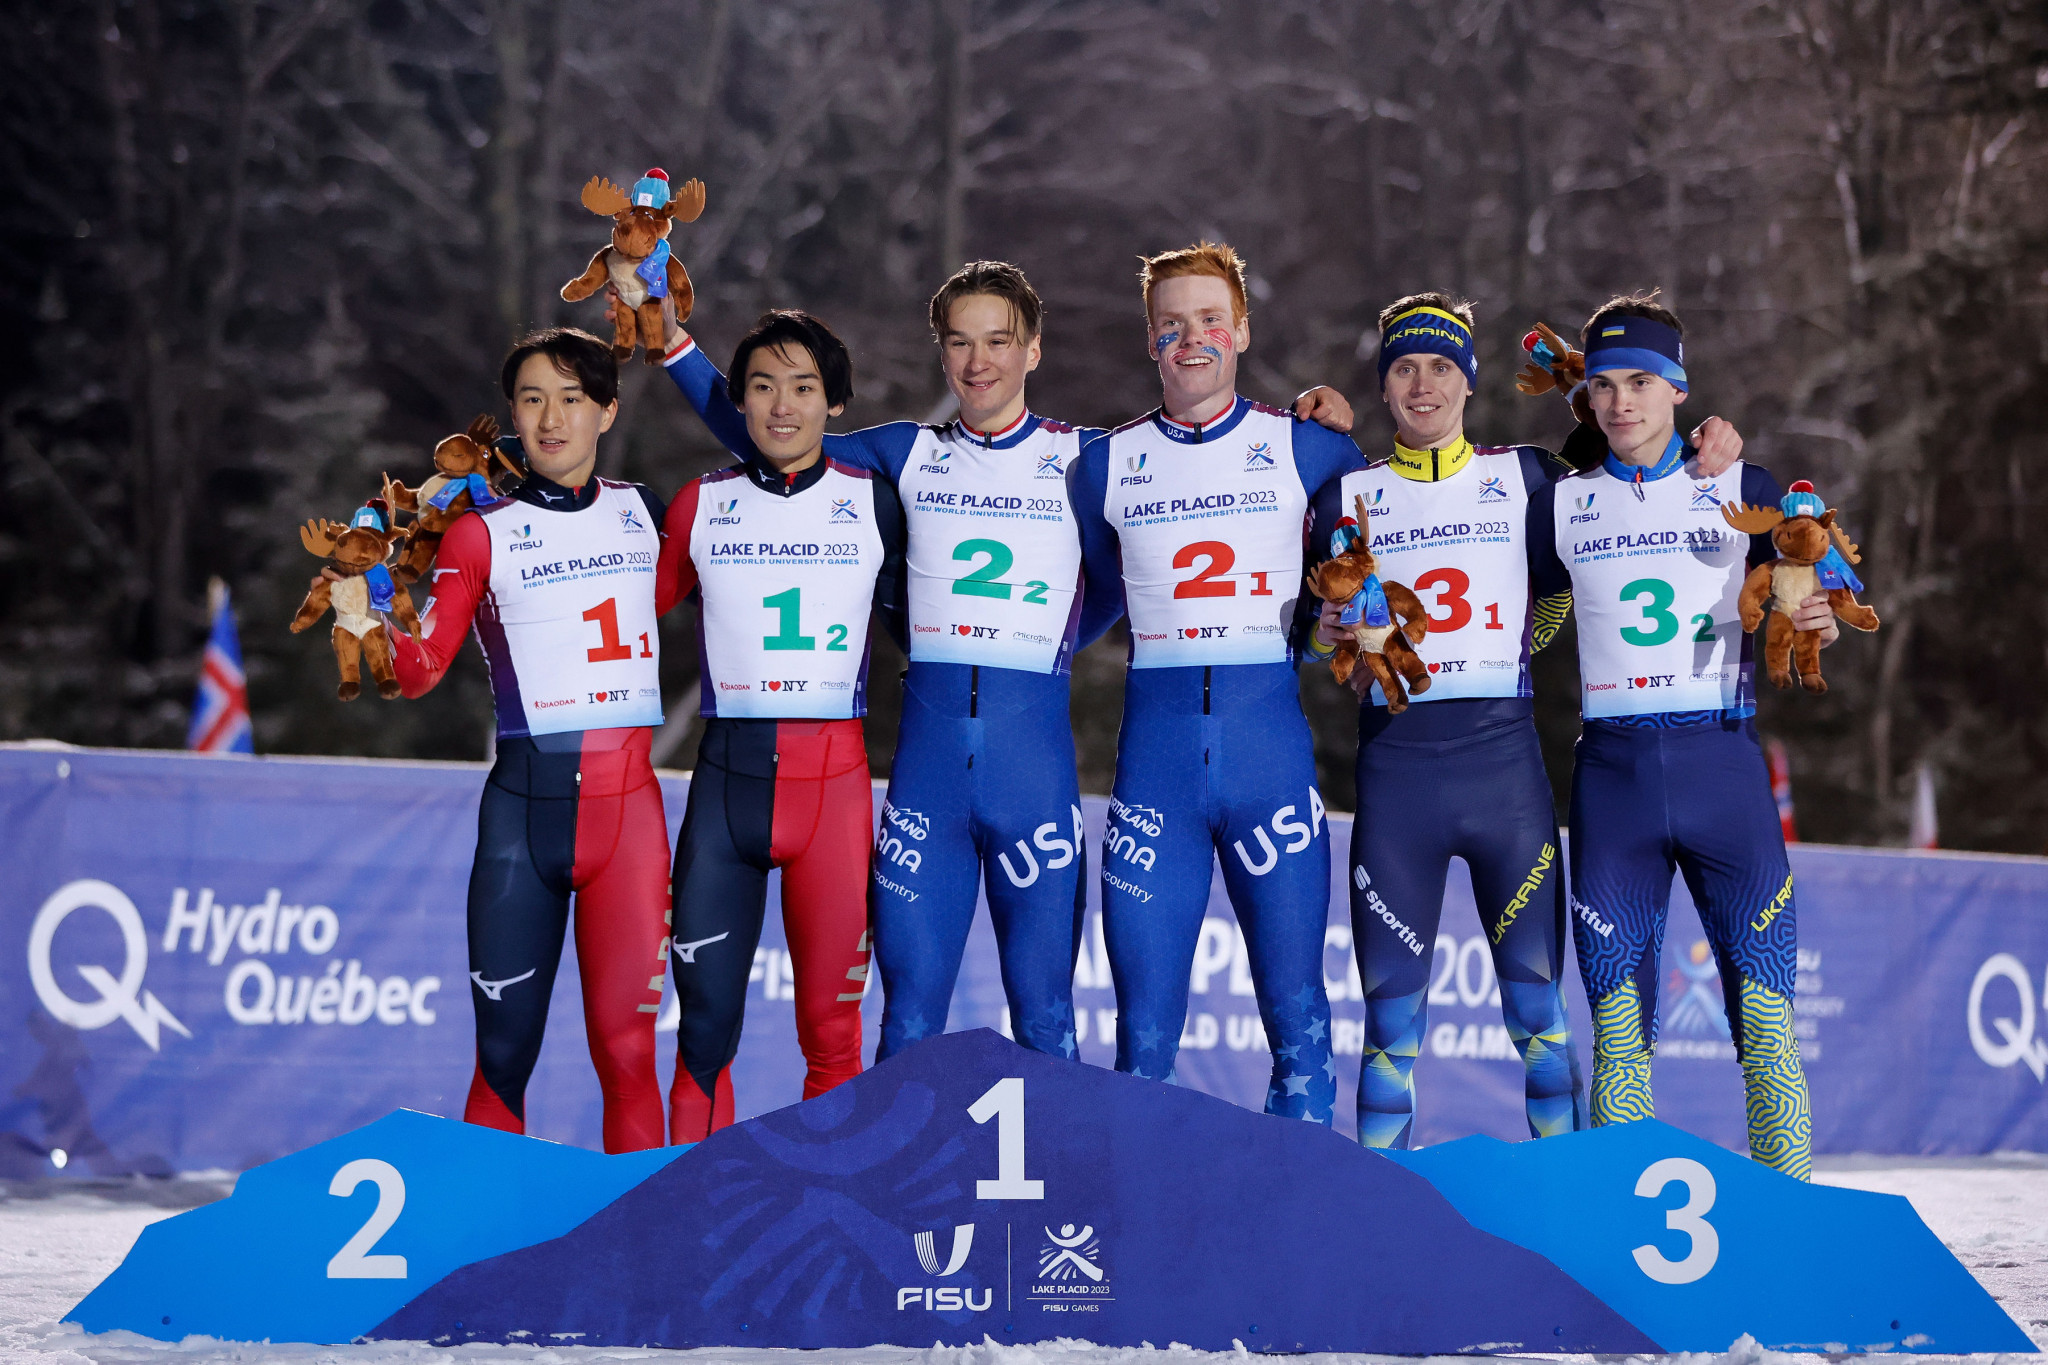 Japan had a 25-second lead at the start of the race due to their ski jumping score but could not hold out, while Ukraine claimed bronze ©FISU